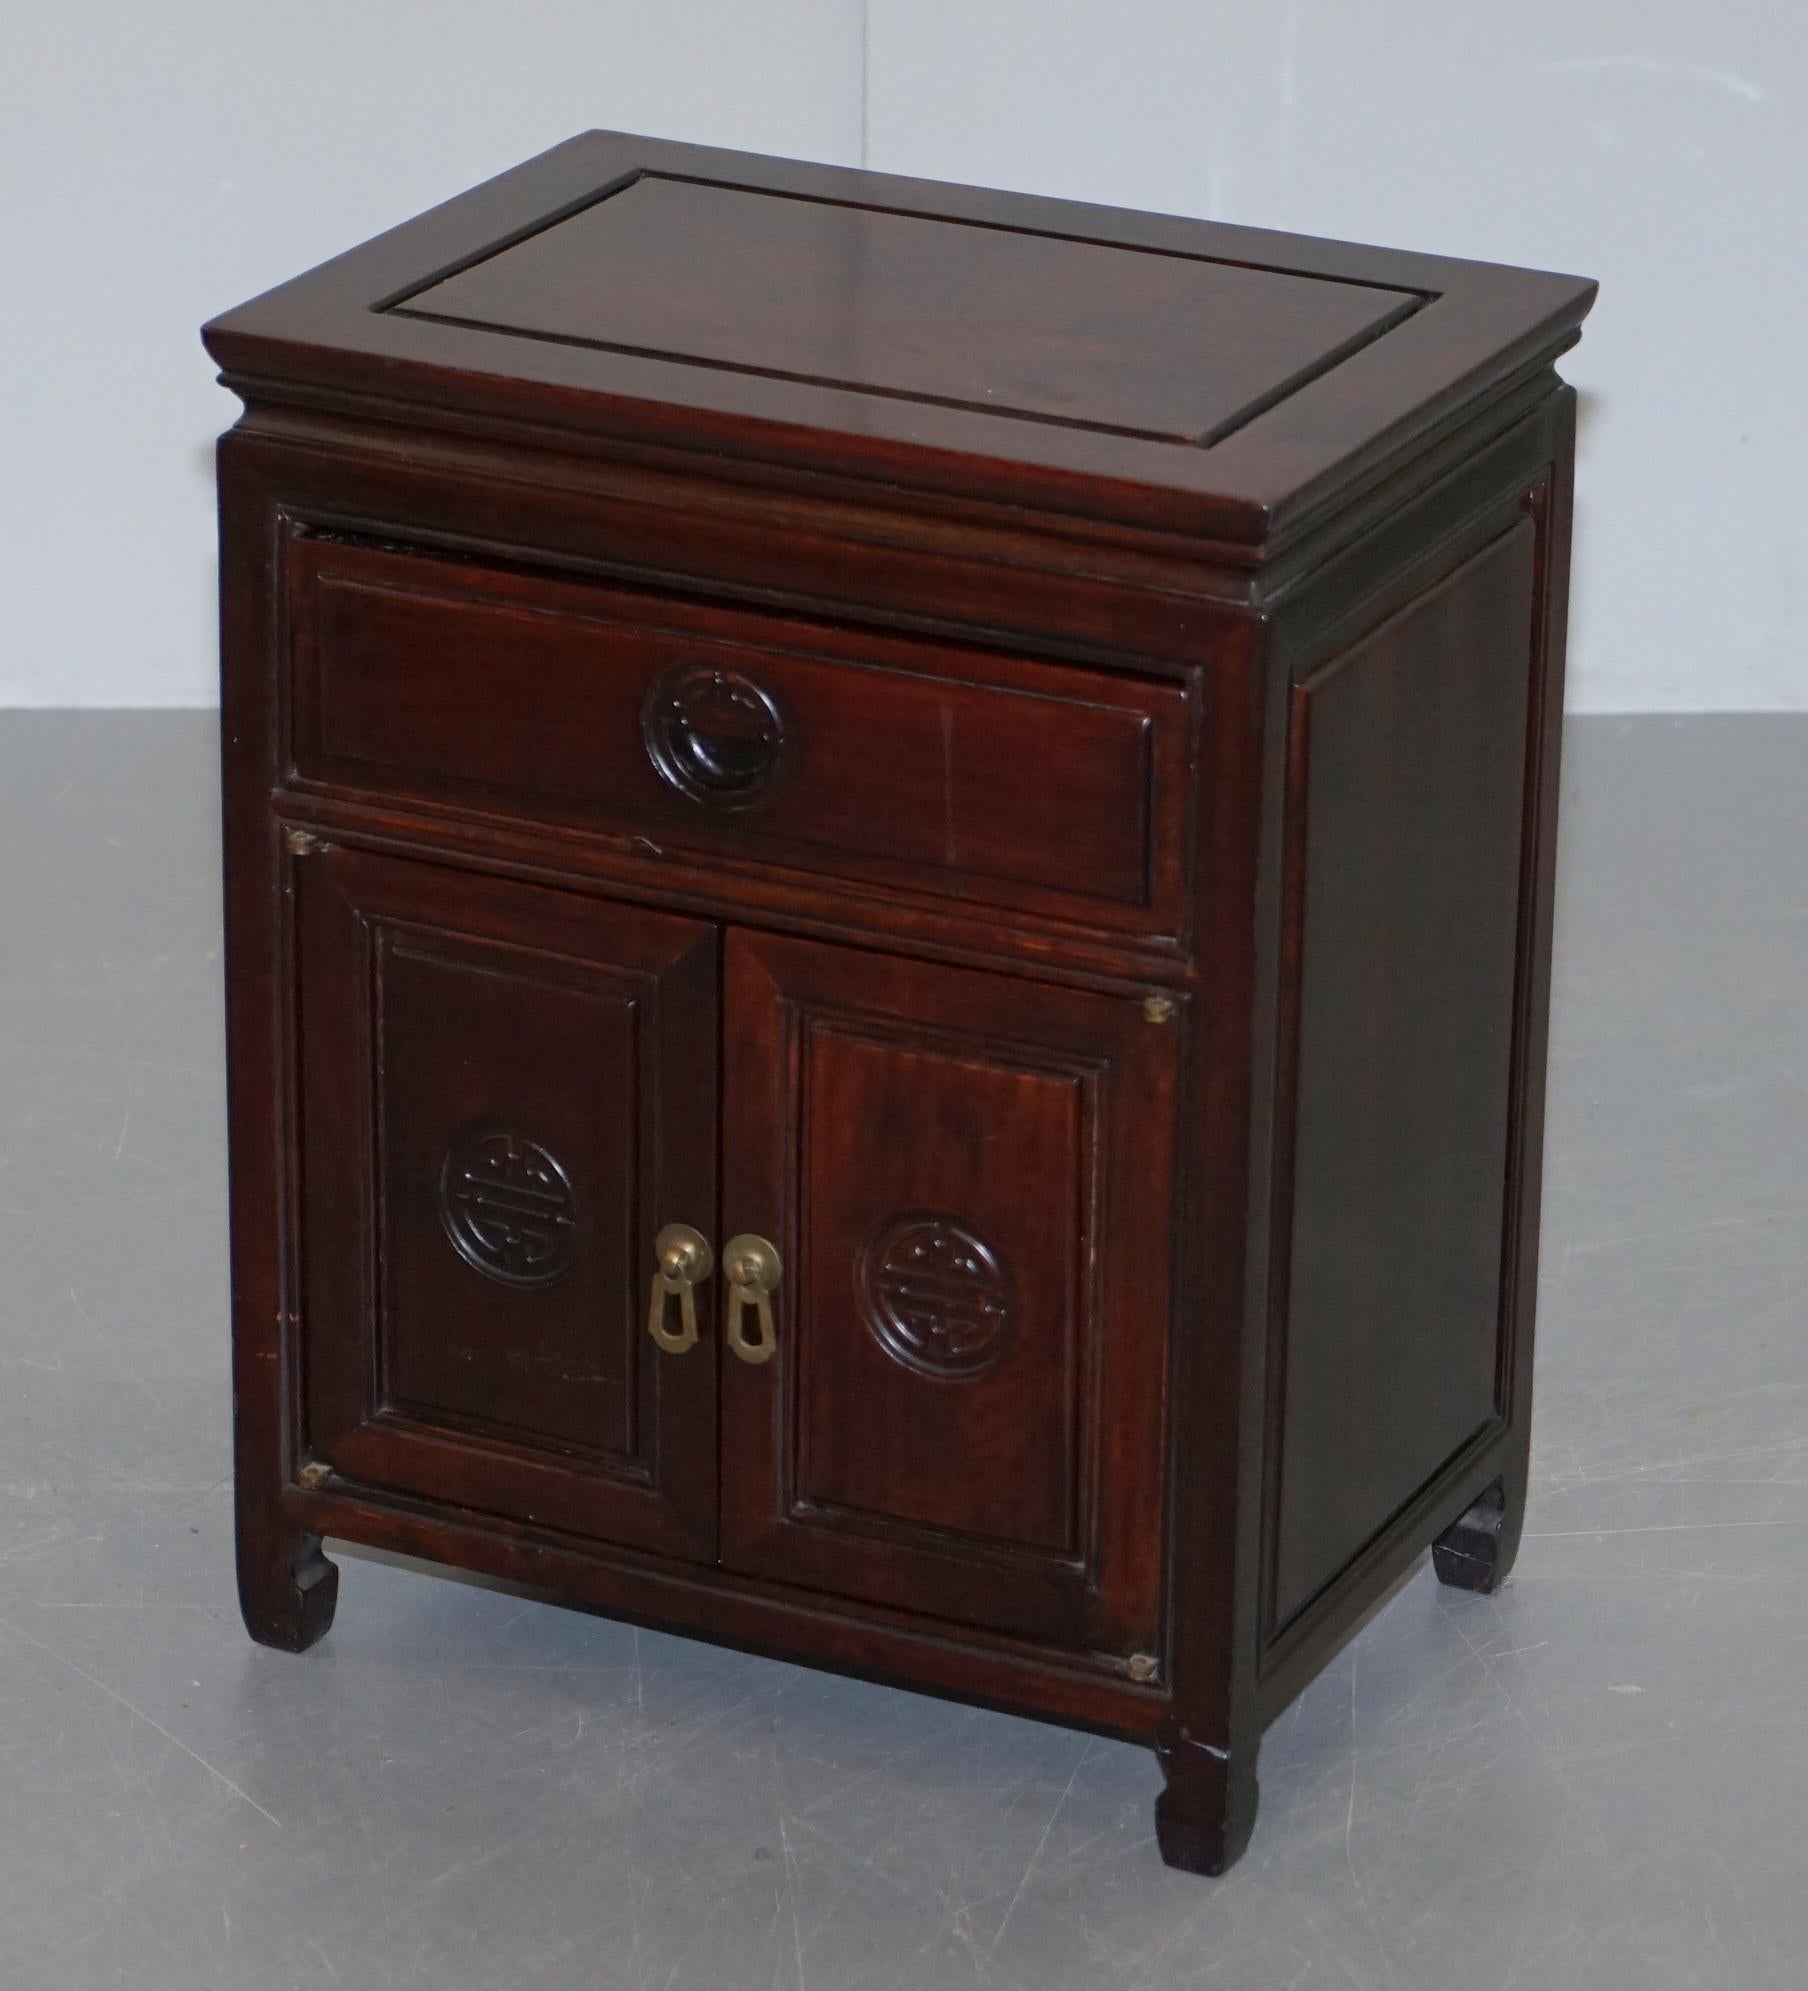 Chinese Export Lovely Chinese Carved Red Teak Side Table with Small Cupboard and Single Drawer